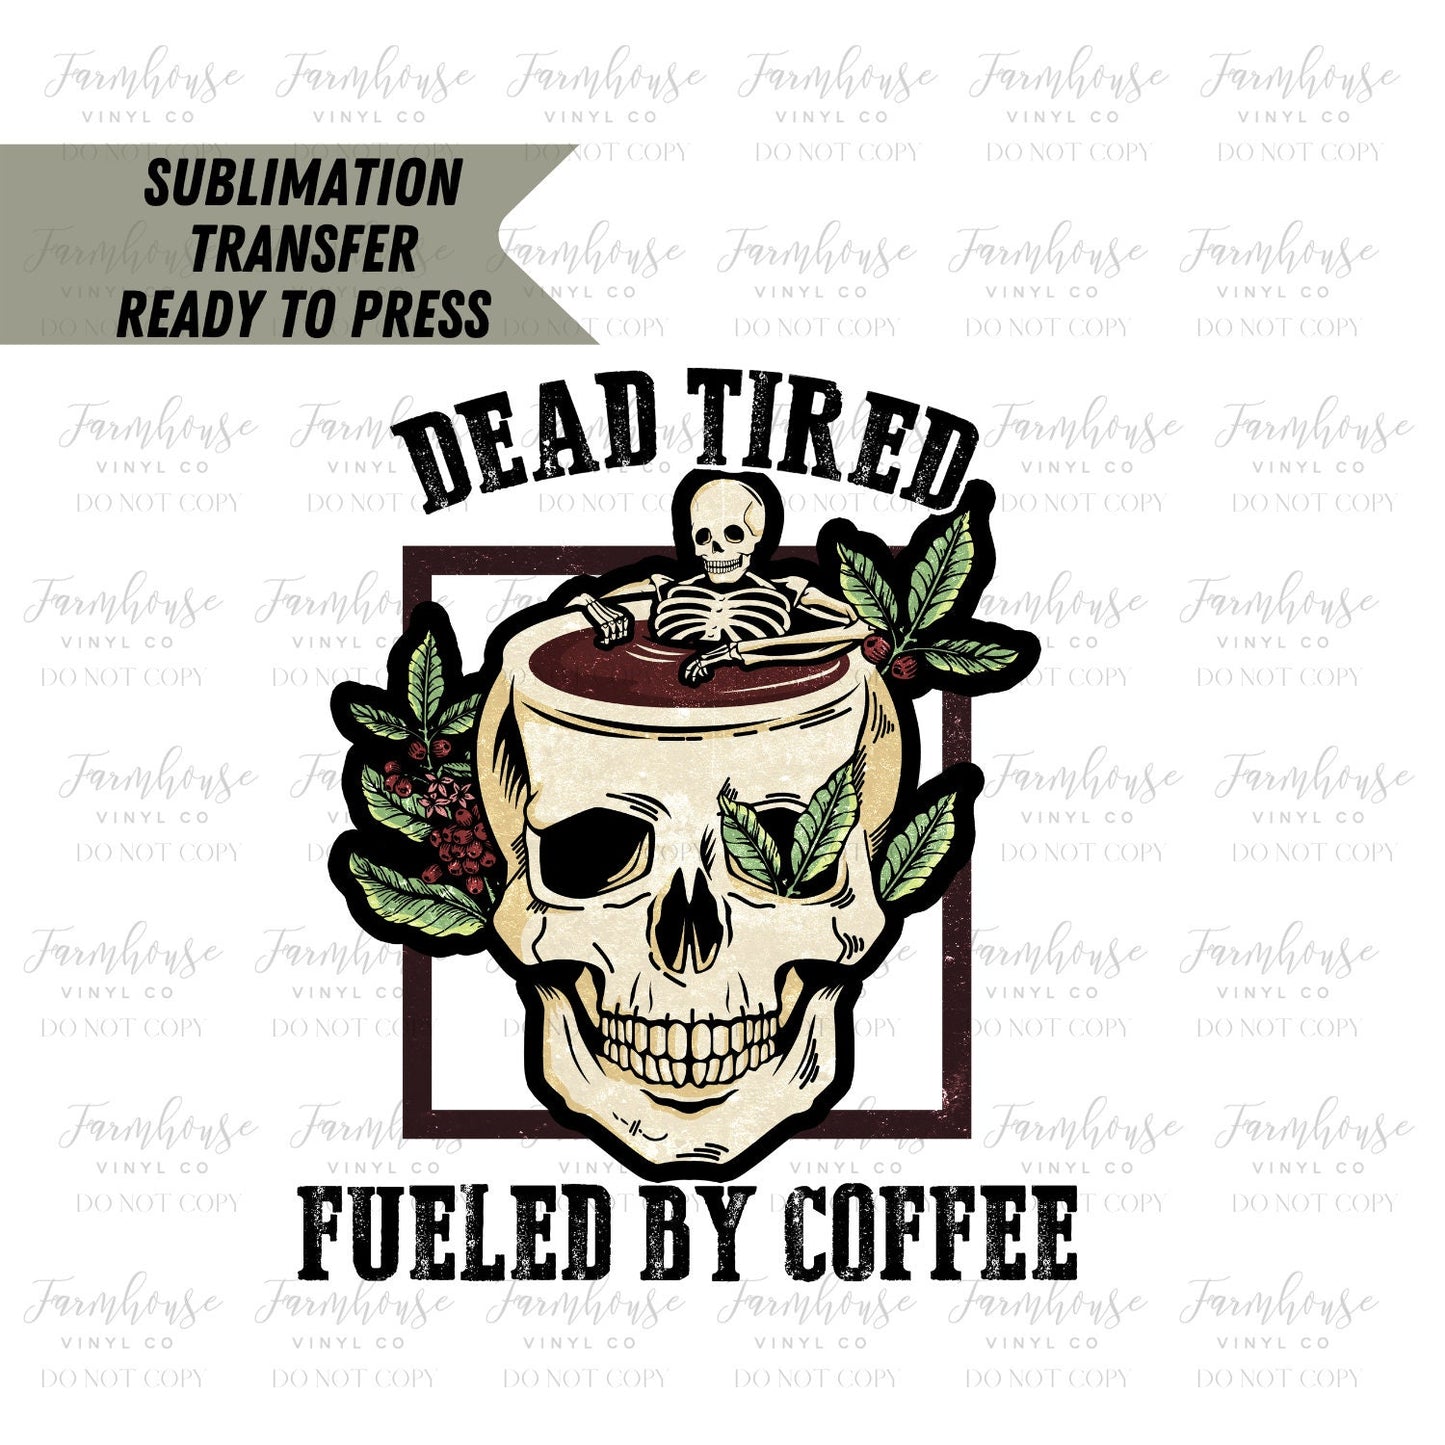 Ready To Press, Sublimation Transfers, Cactus Skull BOHO, Sublimation, Transfer Ready To Press, Dead Tired But Caffeinated Heat Transfer - Farmhouse Vinyl Co